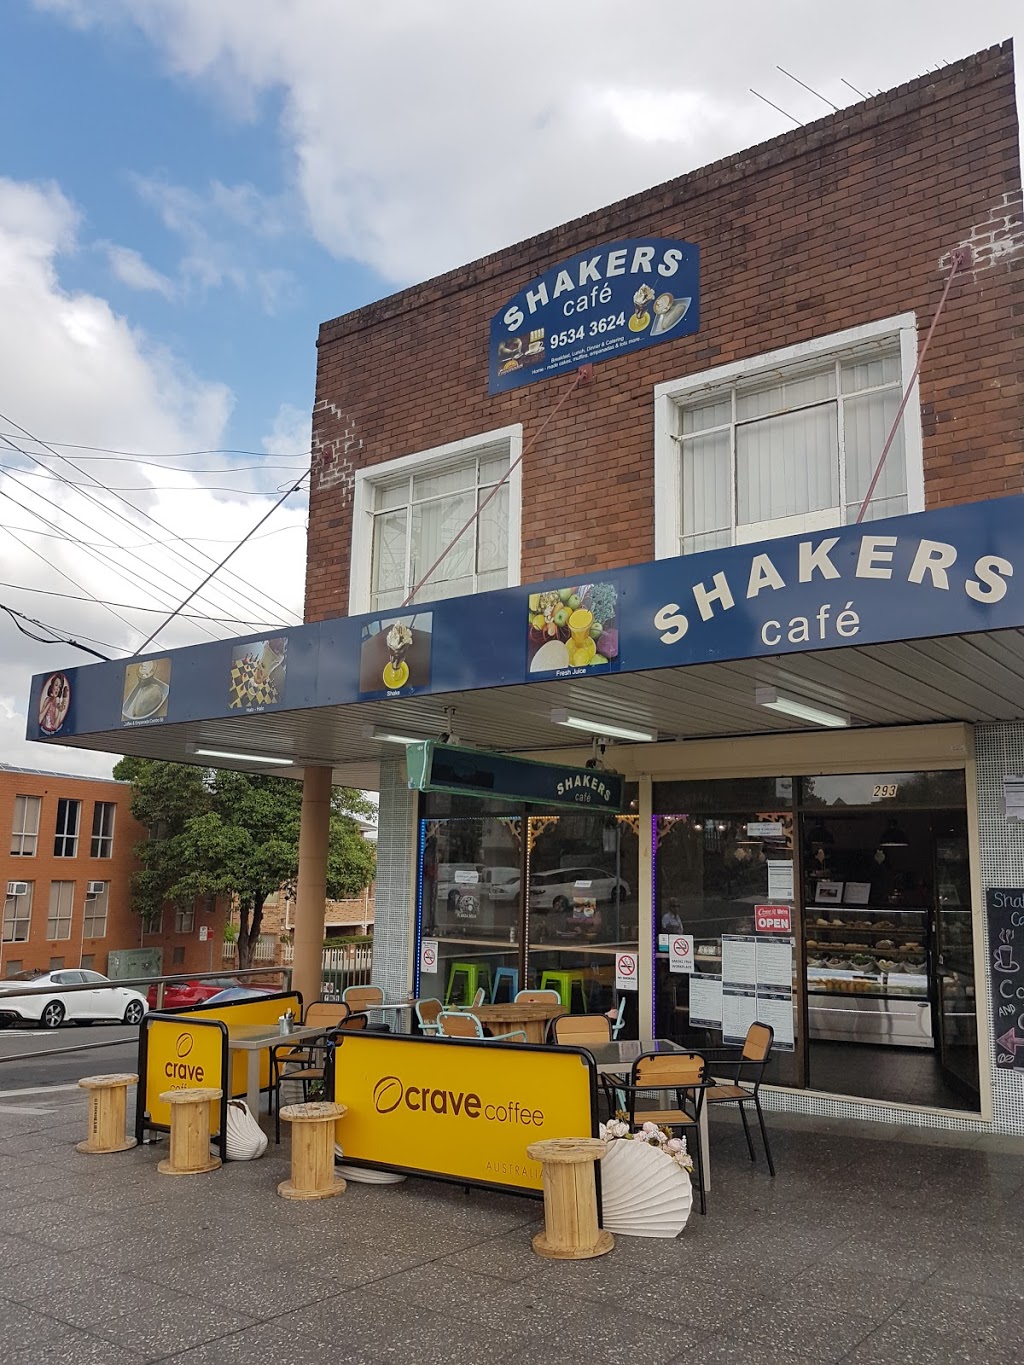 Shakers Cafe | cafe | 293 Belmore Rd, Riverwood NSW 2210, Australia | 0295343624 OR +61 2 9534 3624